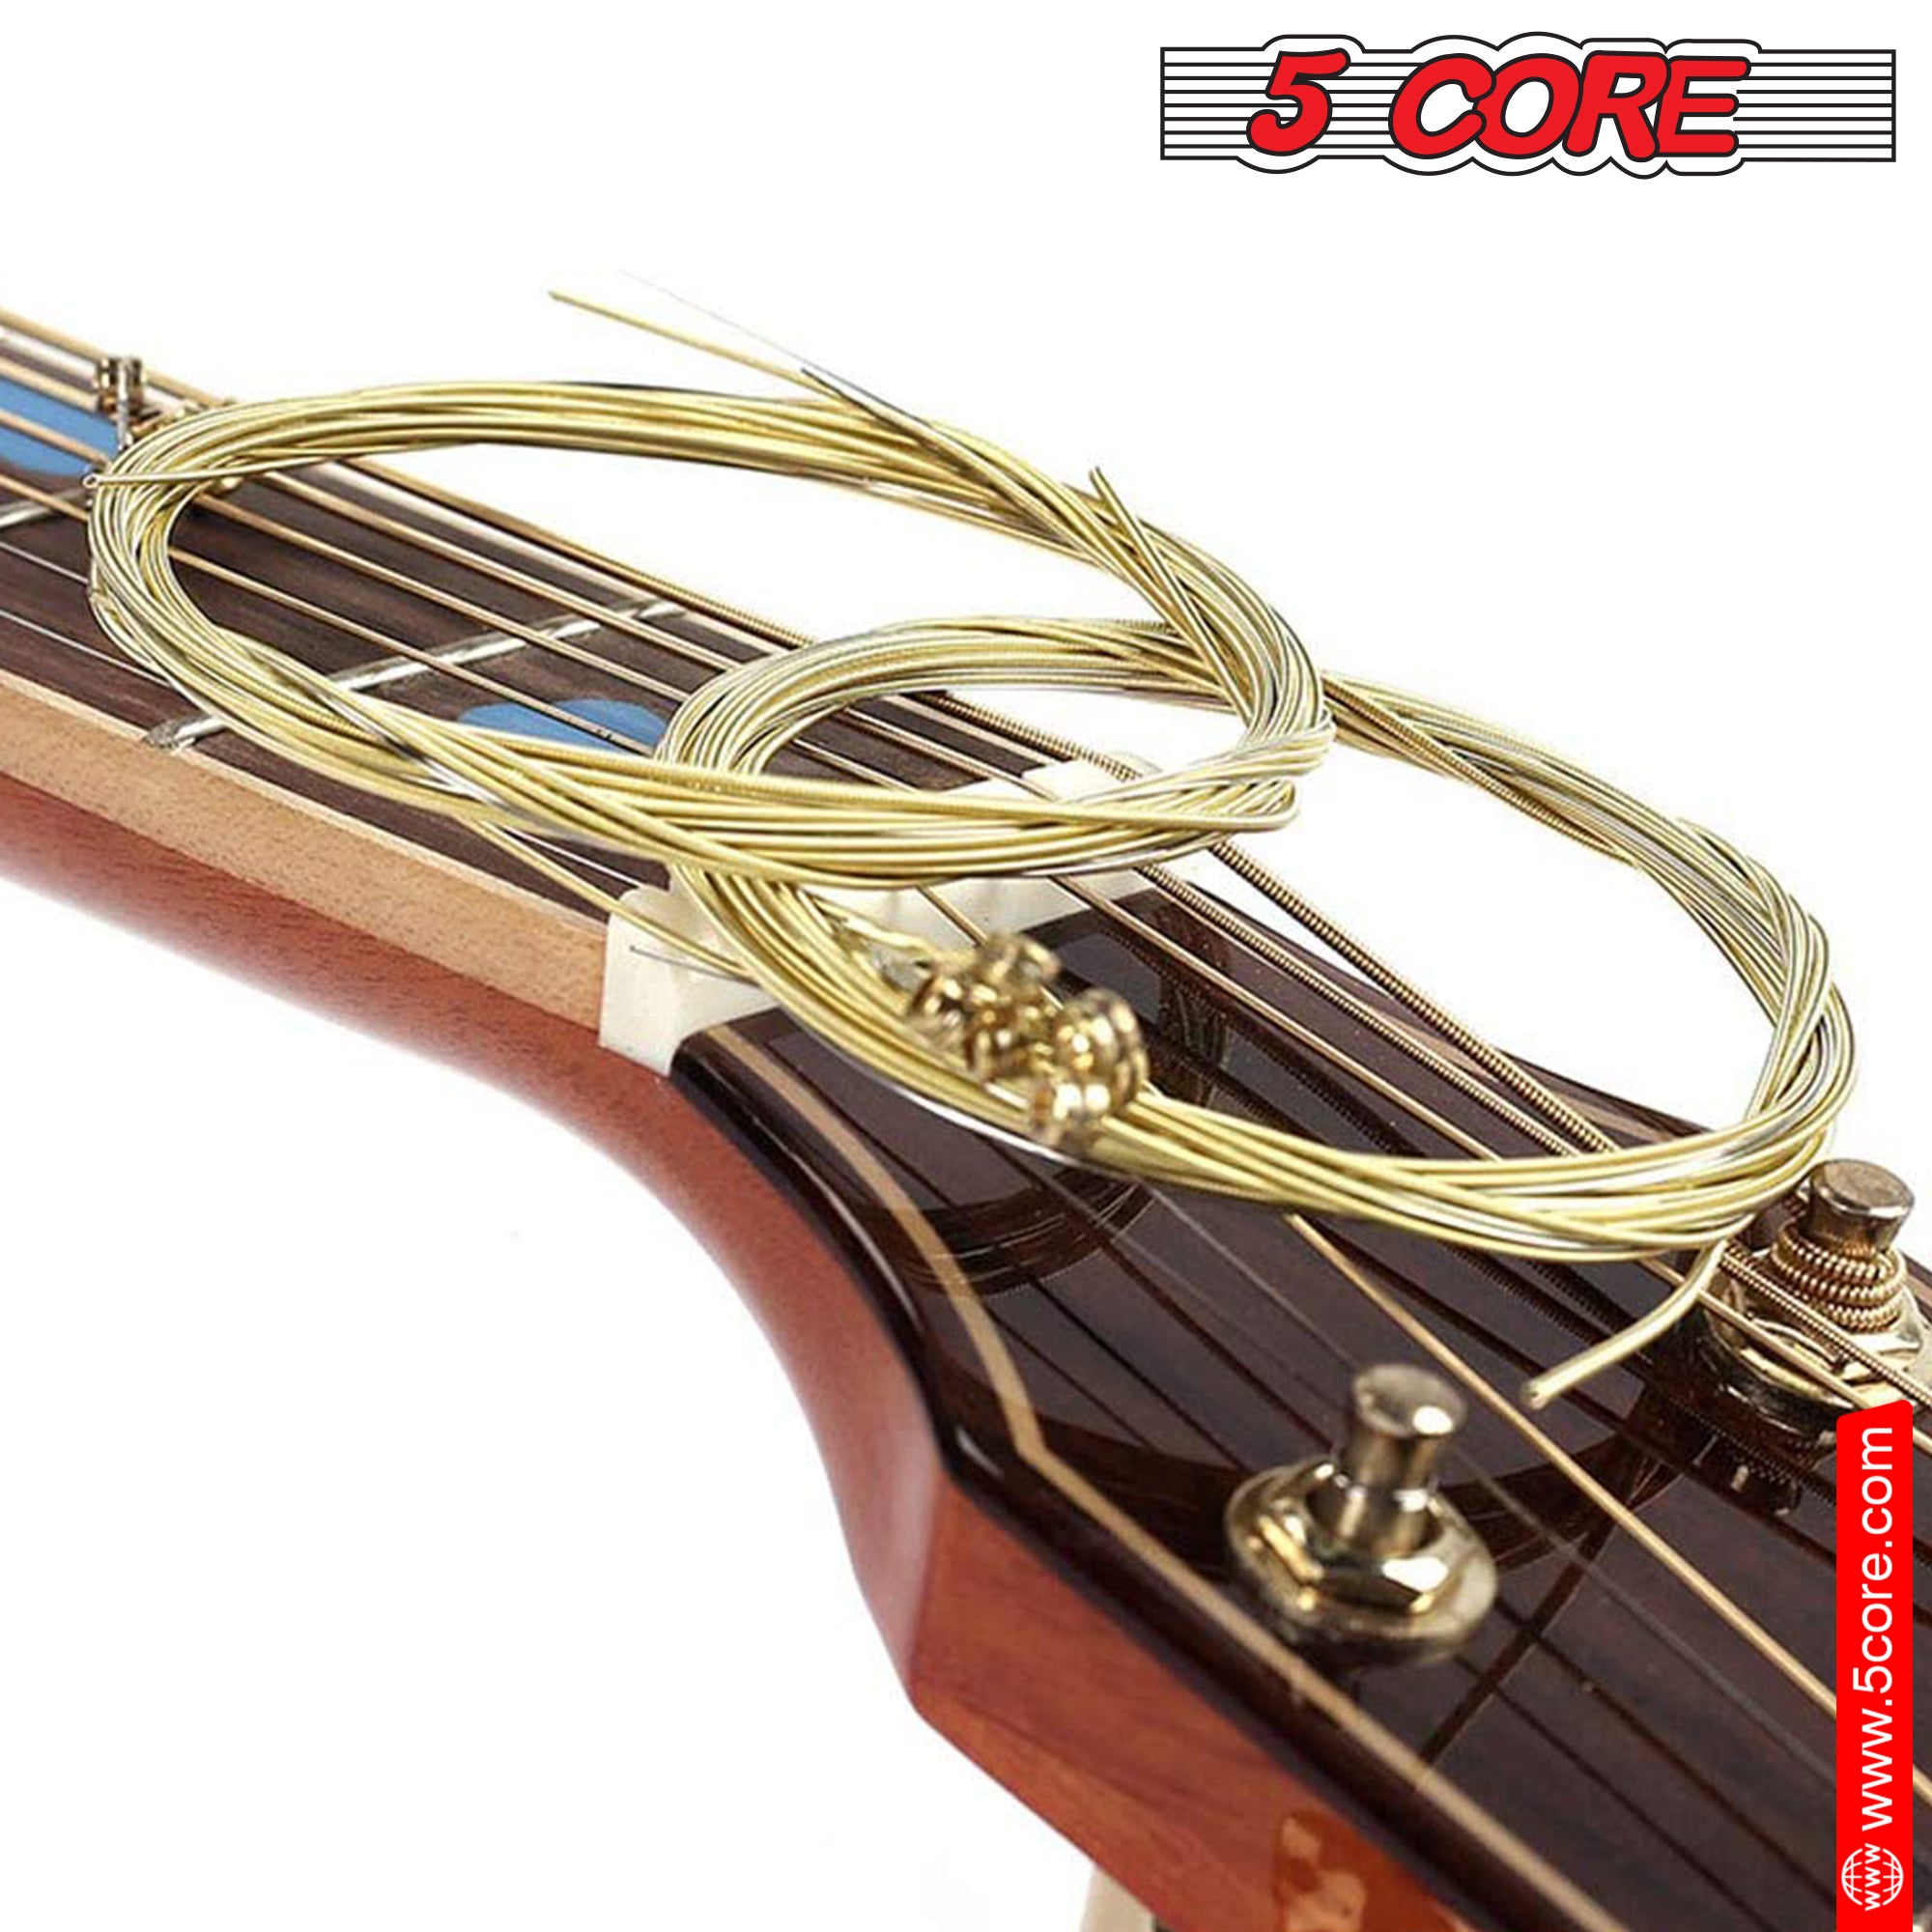 5 Core Guitar Strings • 0.010-0.047 Phosphor Bronze w Deep Bright Tone for 6 String Acoustic Guitars